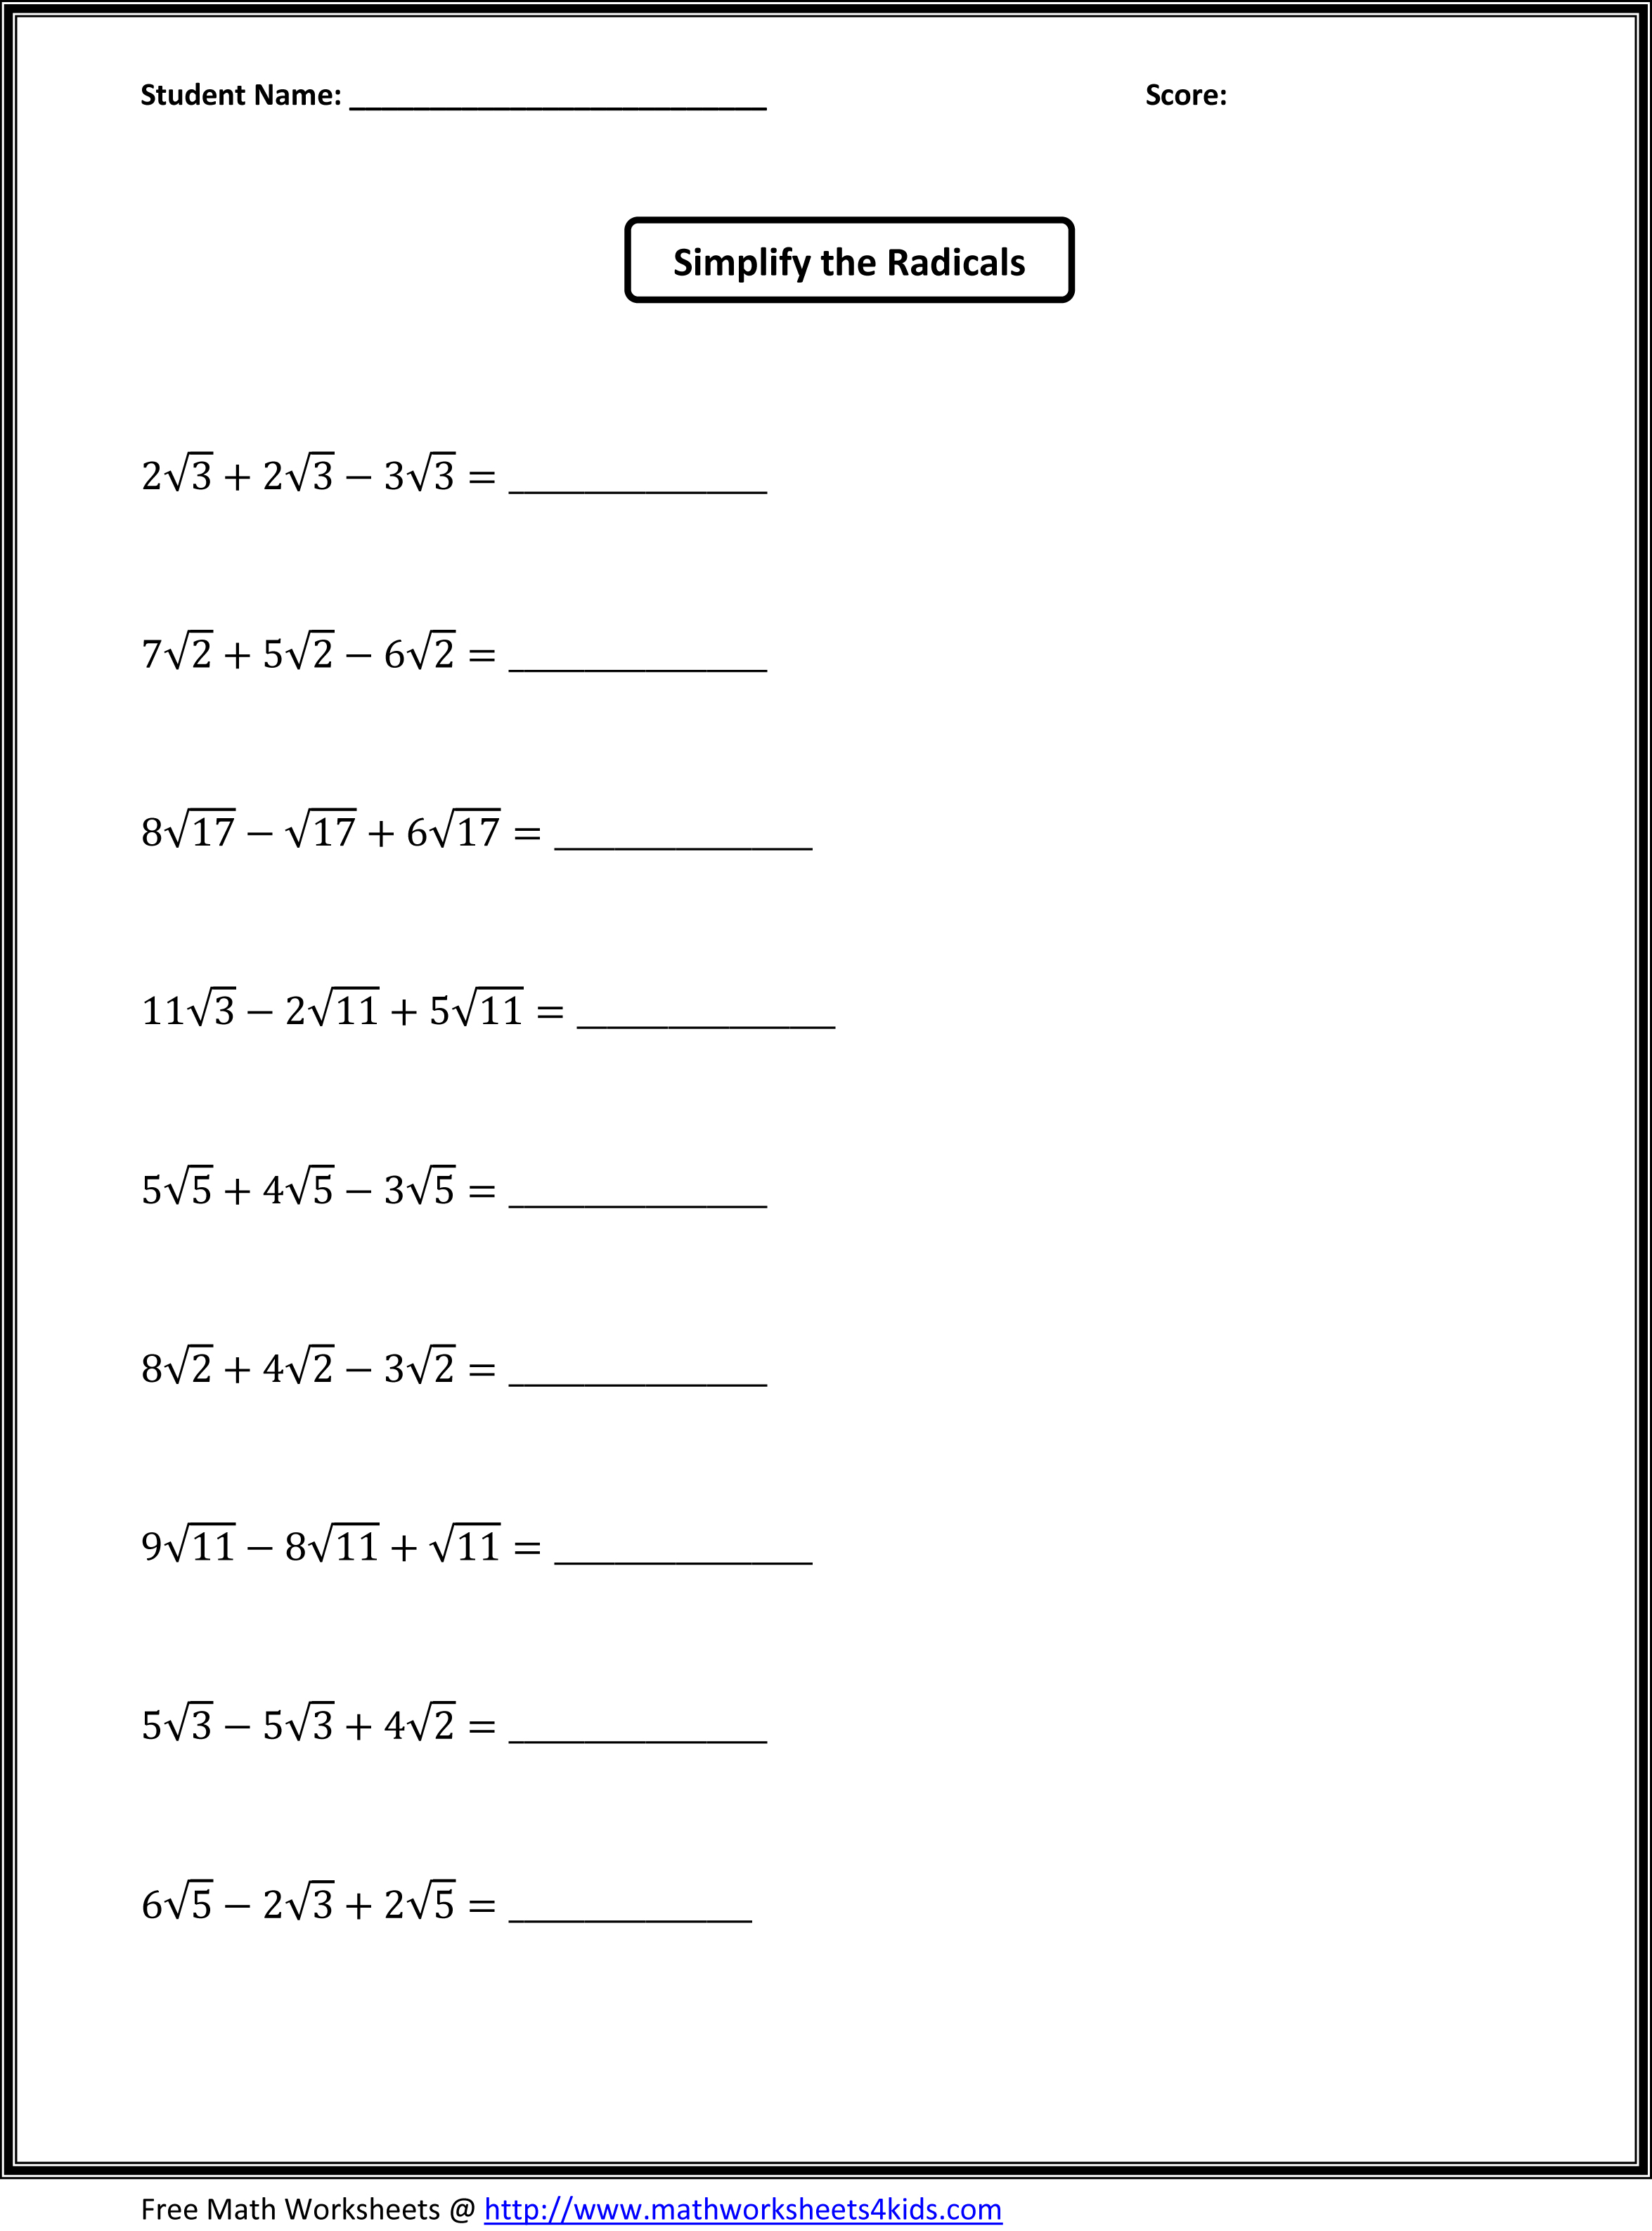 Math Worksheets for 7th Graders